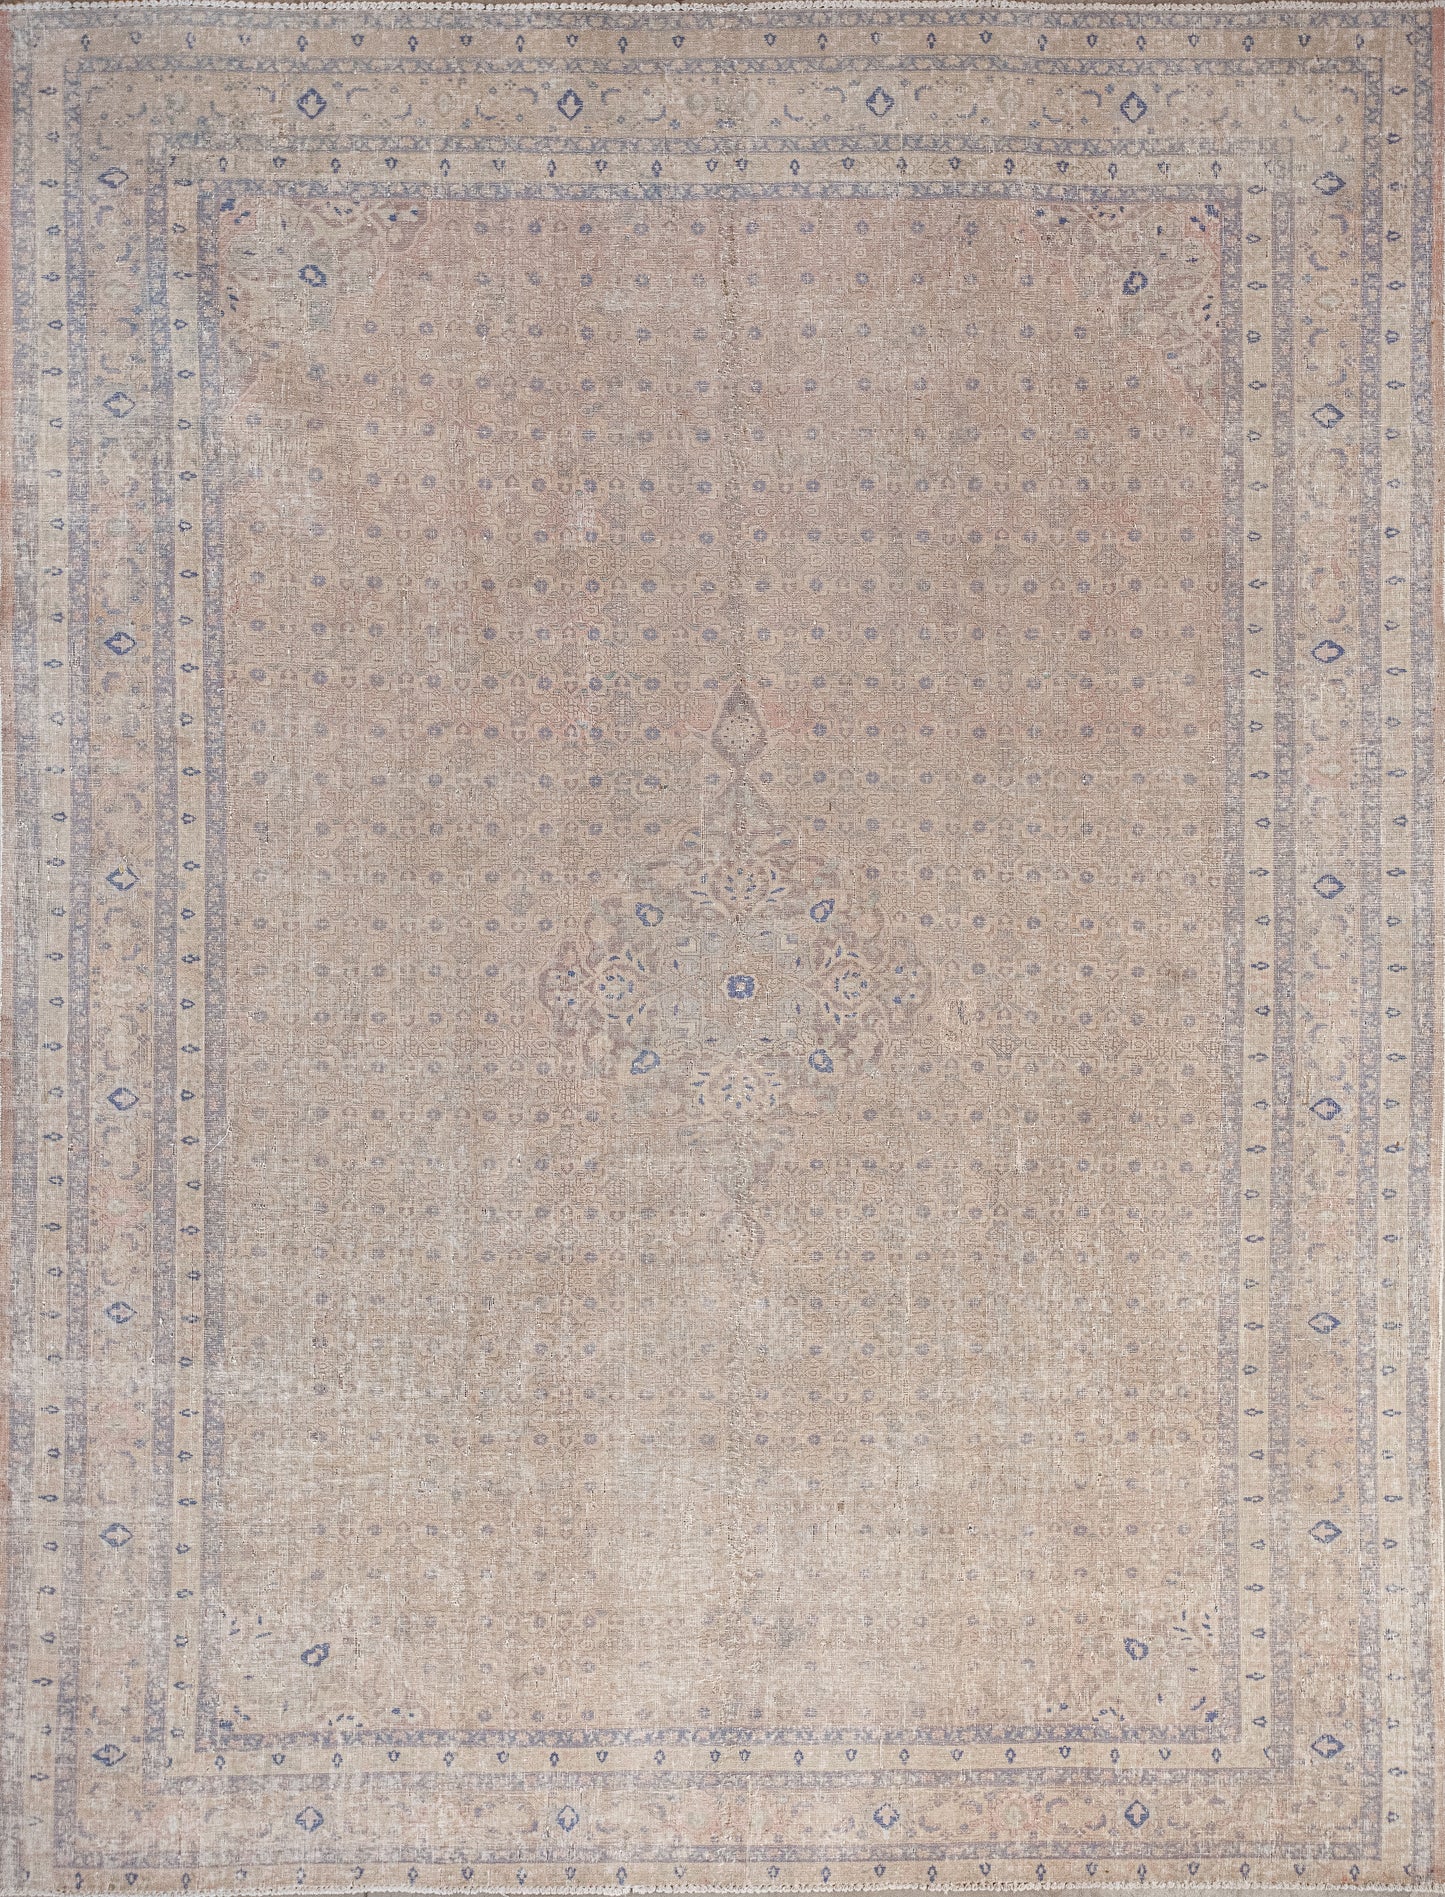 Cheerful rug was woven to be present at your festivities. The color scheme has a champagne shade for the background, cream for the borders, and a blue pattern.